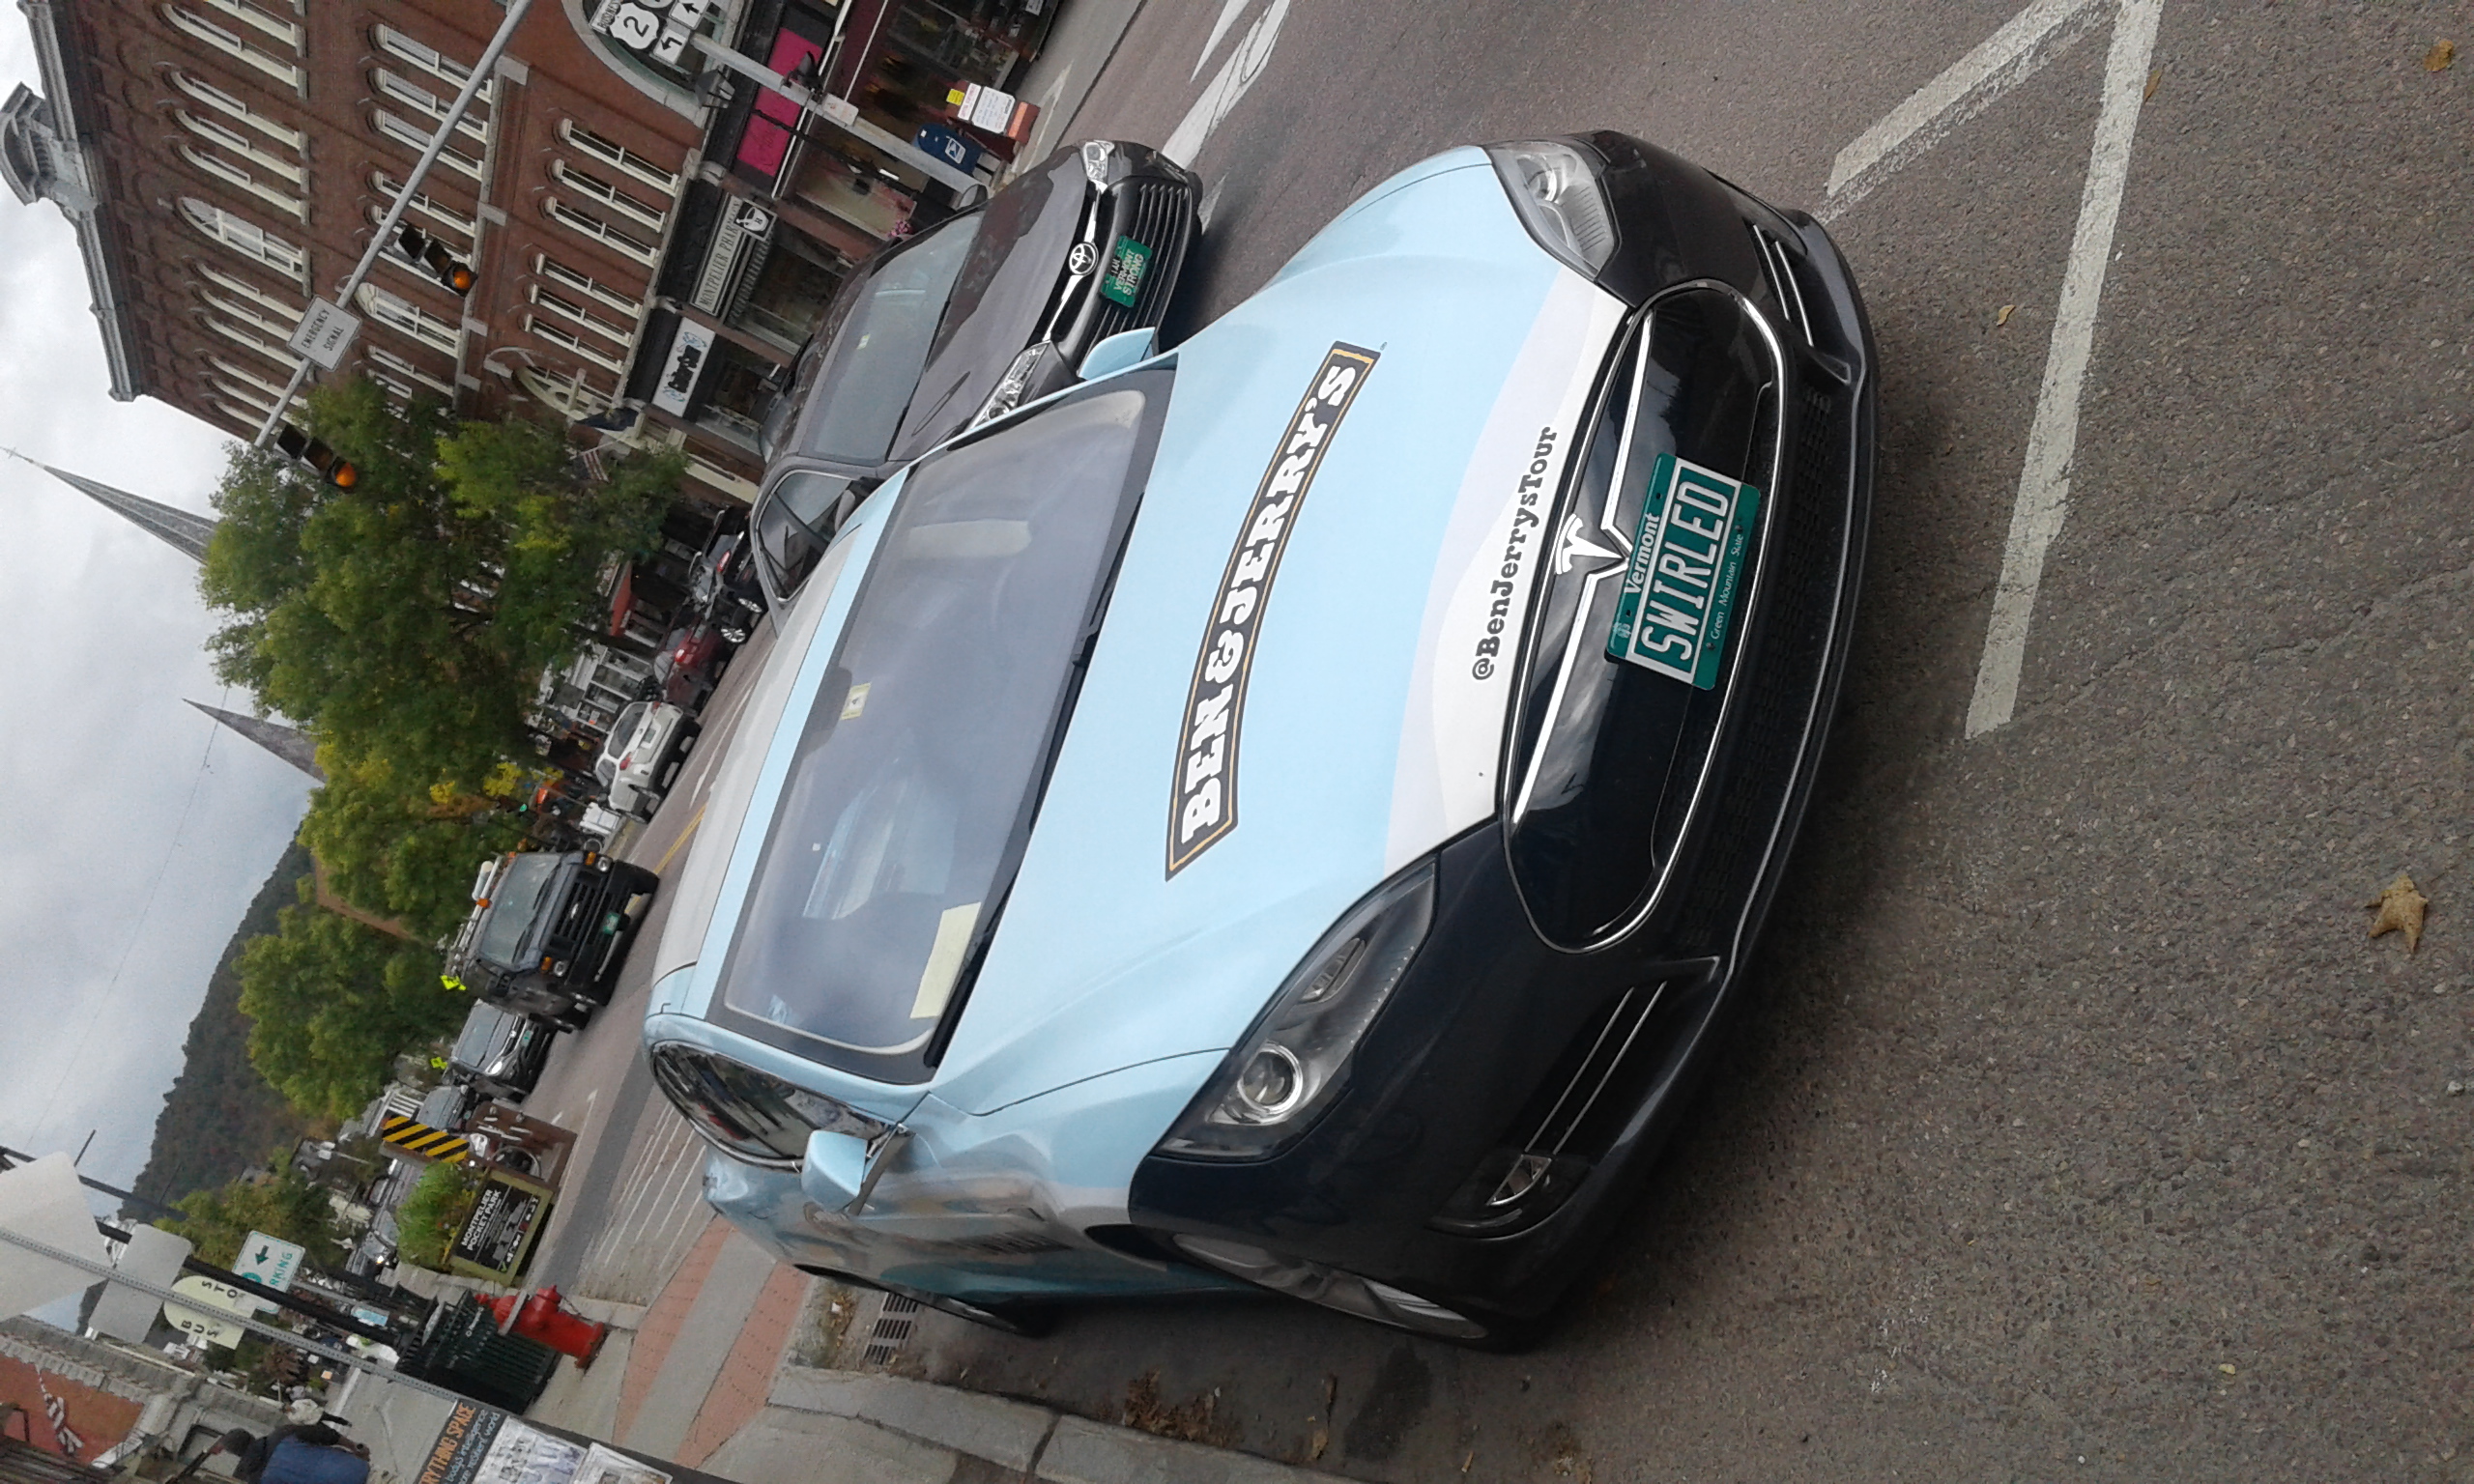 A Tesla Model S with Ben & Jerry's logo